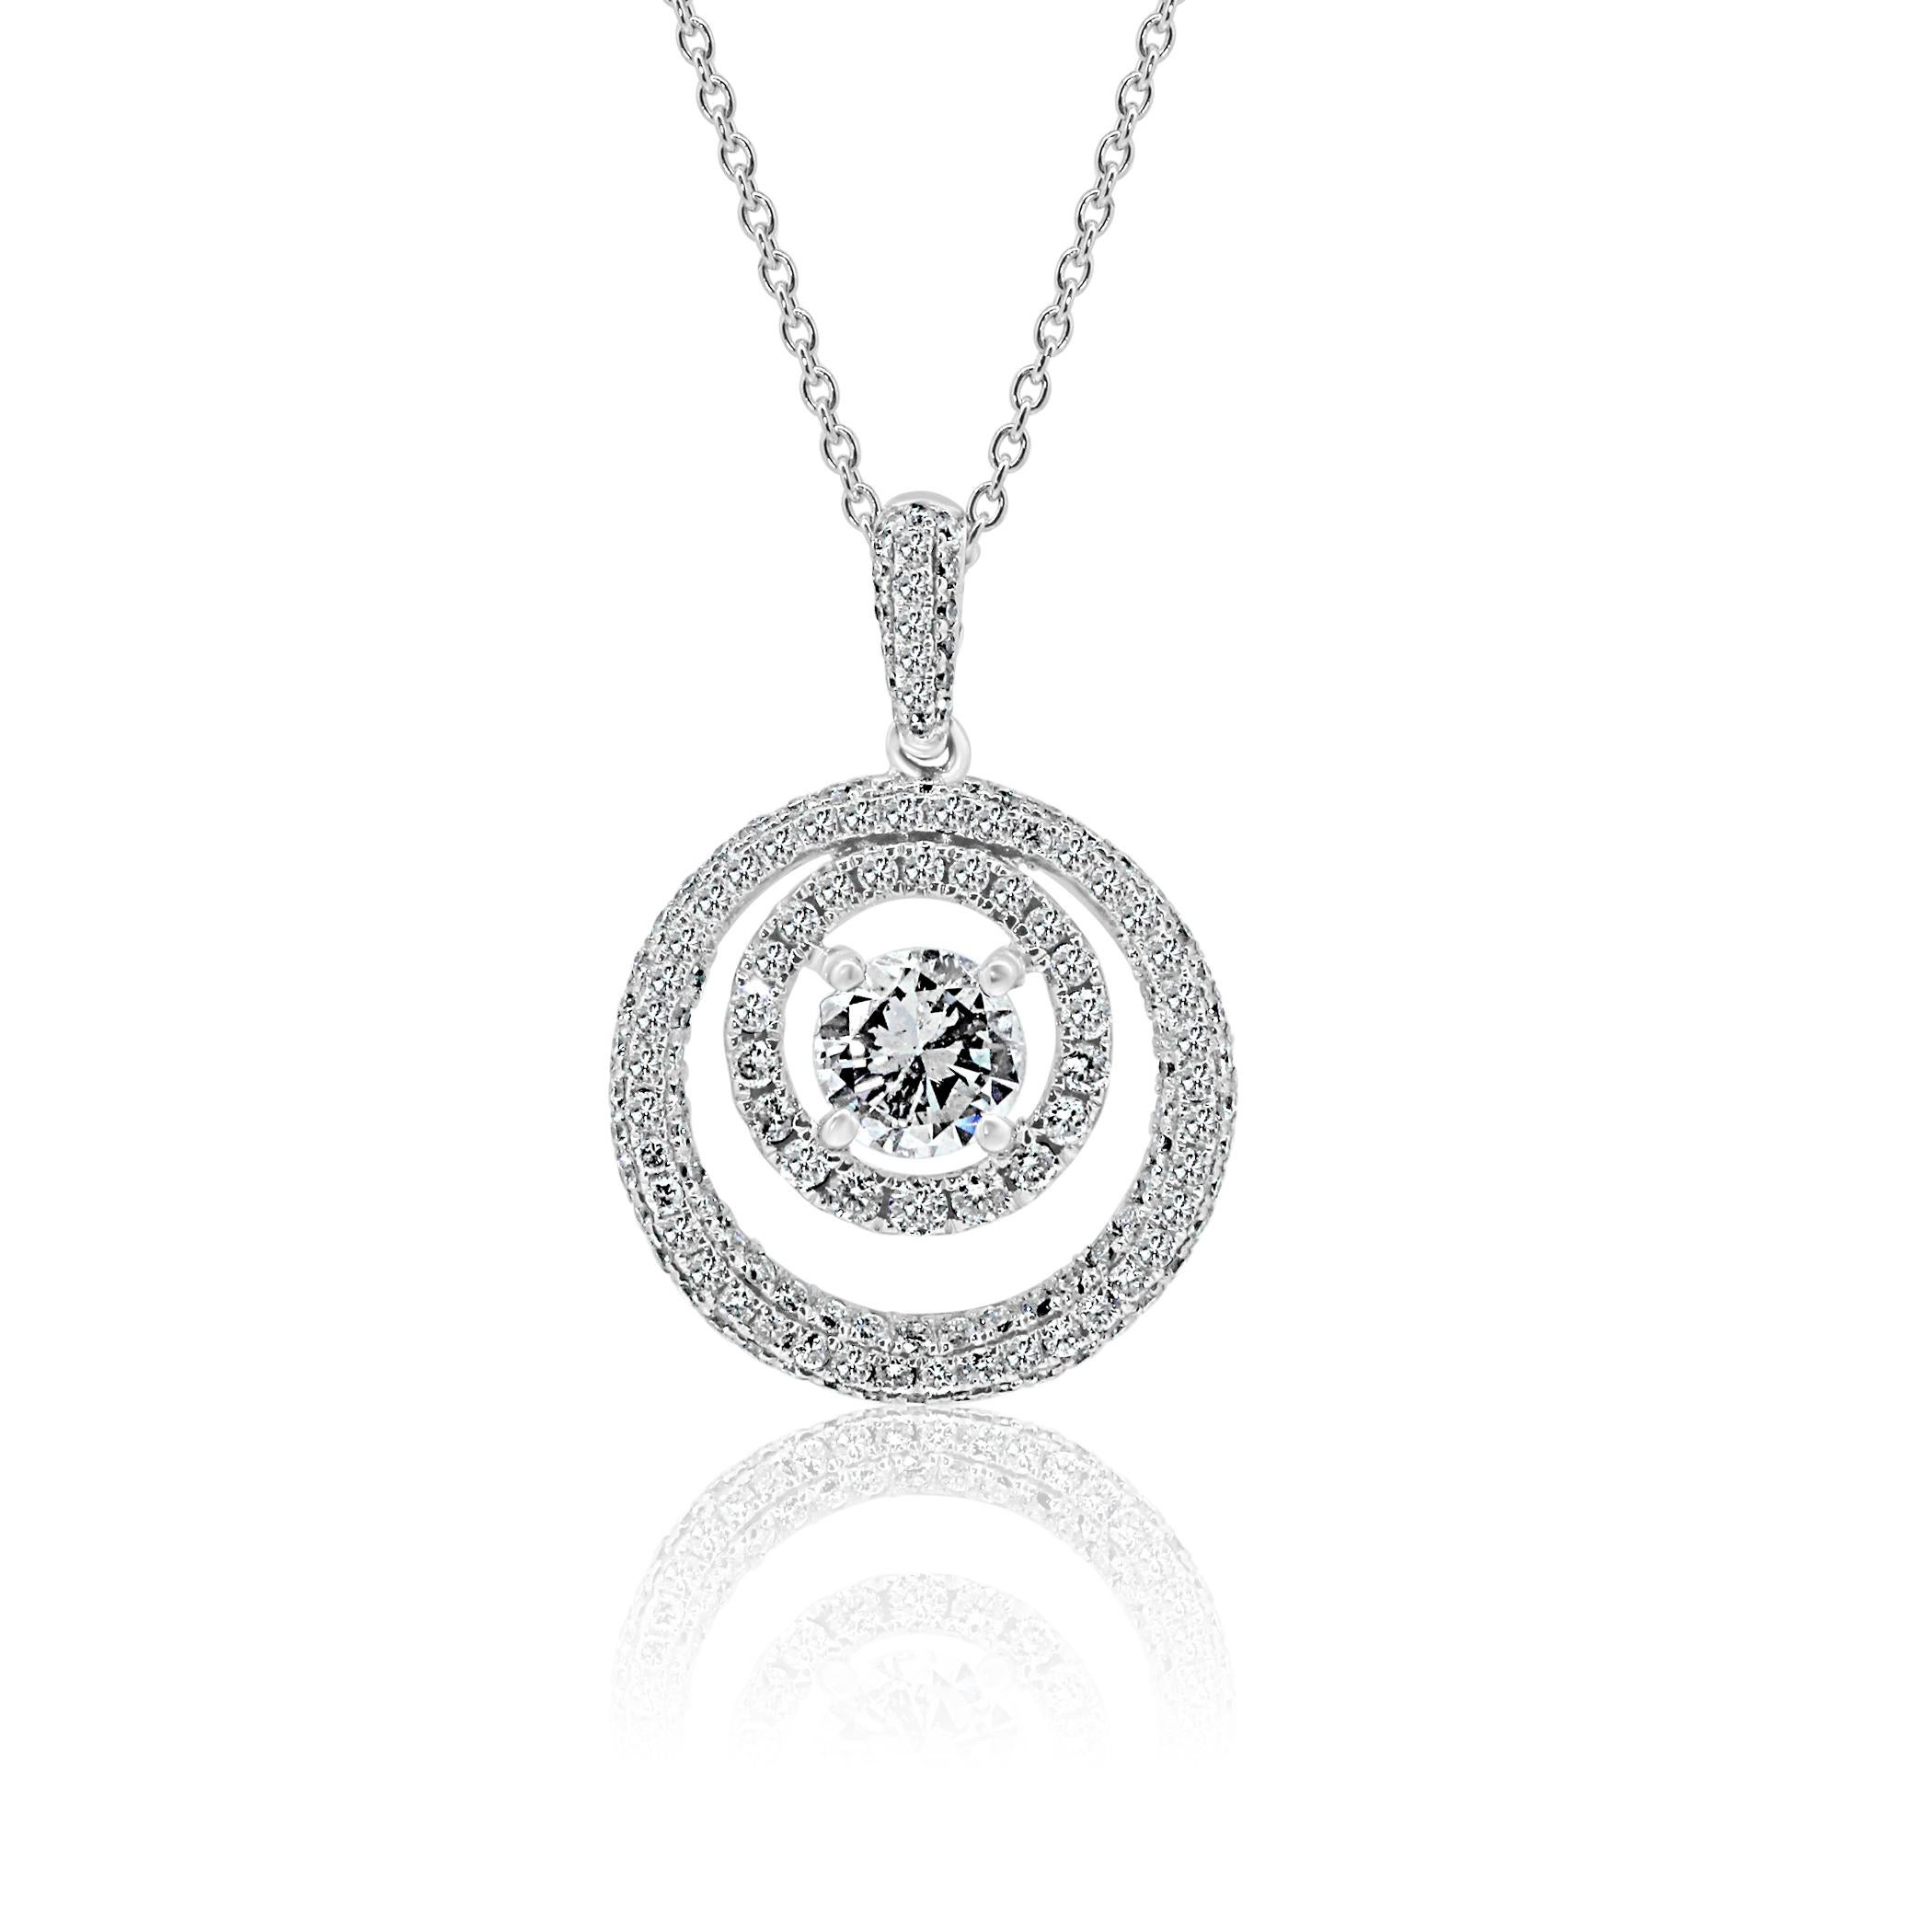 Stunning White G-H Color SI-I Clarity 0.87 Carat Round Diamond Encircled in Double Halo of White G-H Color SI diamonds 1.18 Carat in 14K White Gold Fashion Circle Pendant Chain Necklace.

Style available in different price ranges. Prices are based